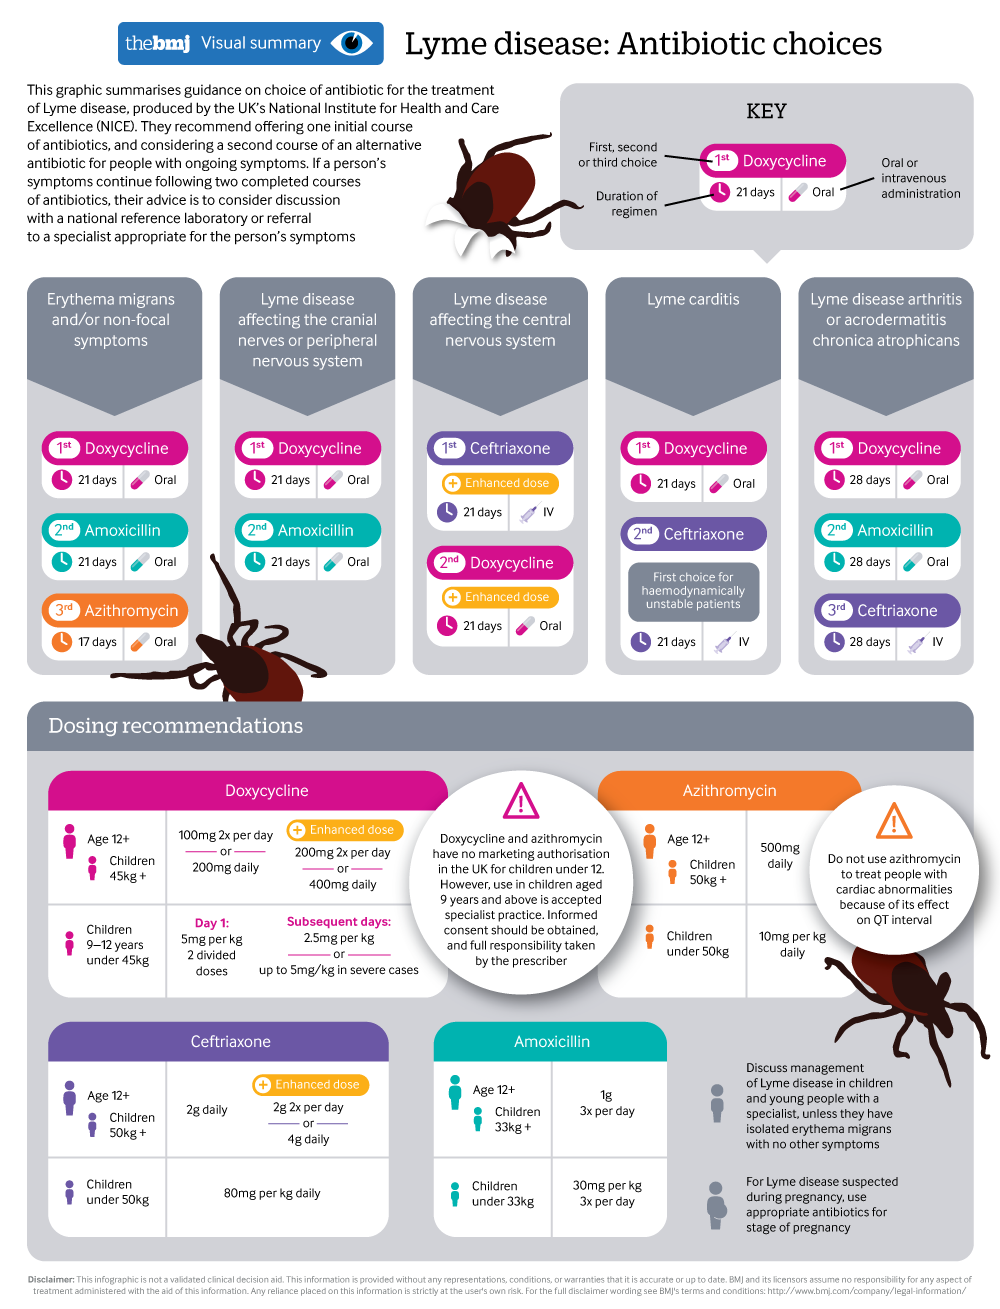 Doxycycline For Lyme : For early Lyme disease, 10 days of ...